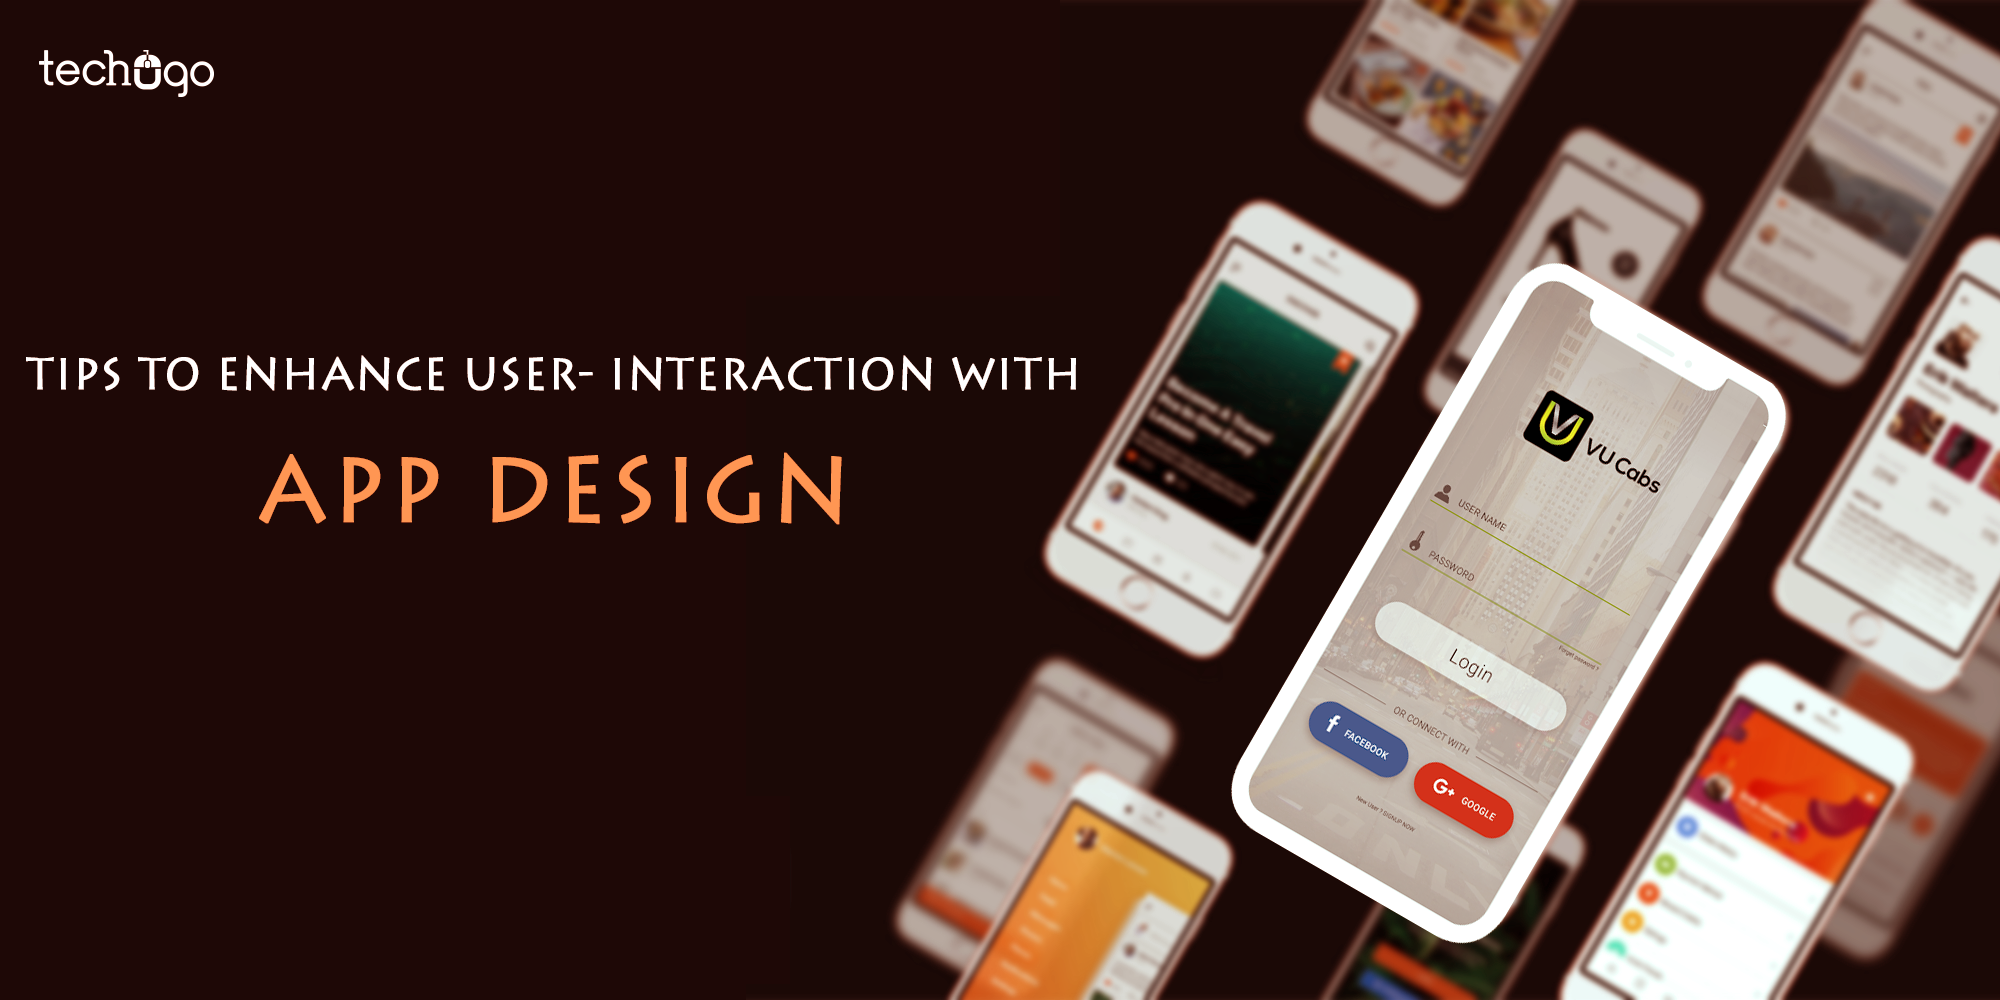 Tips To Enhance User- Interaction With App Design